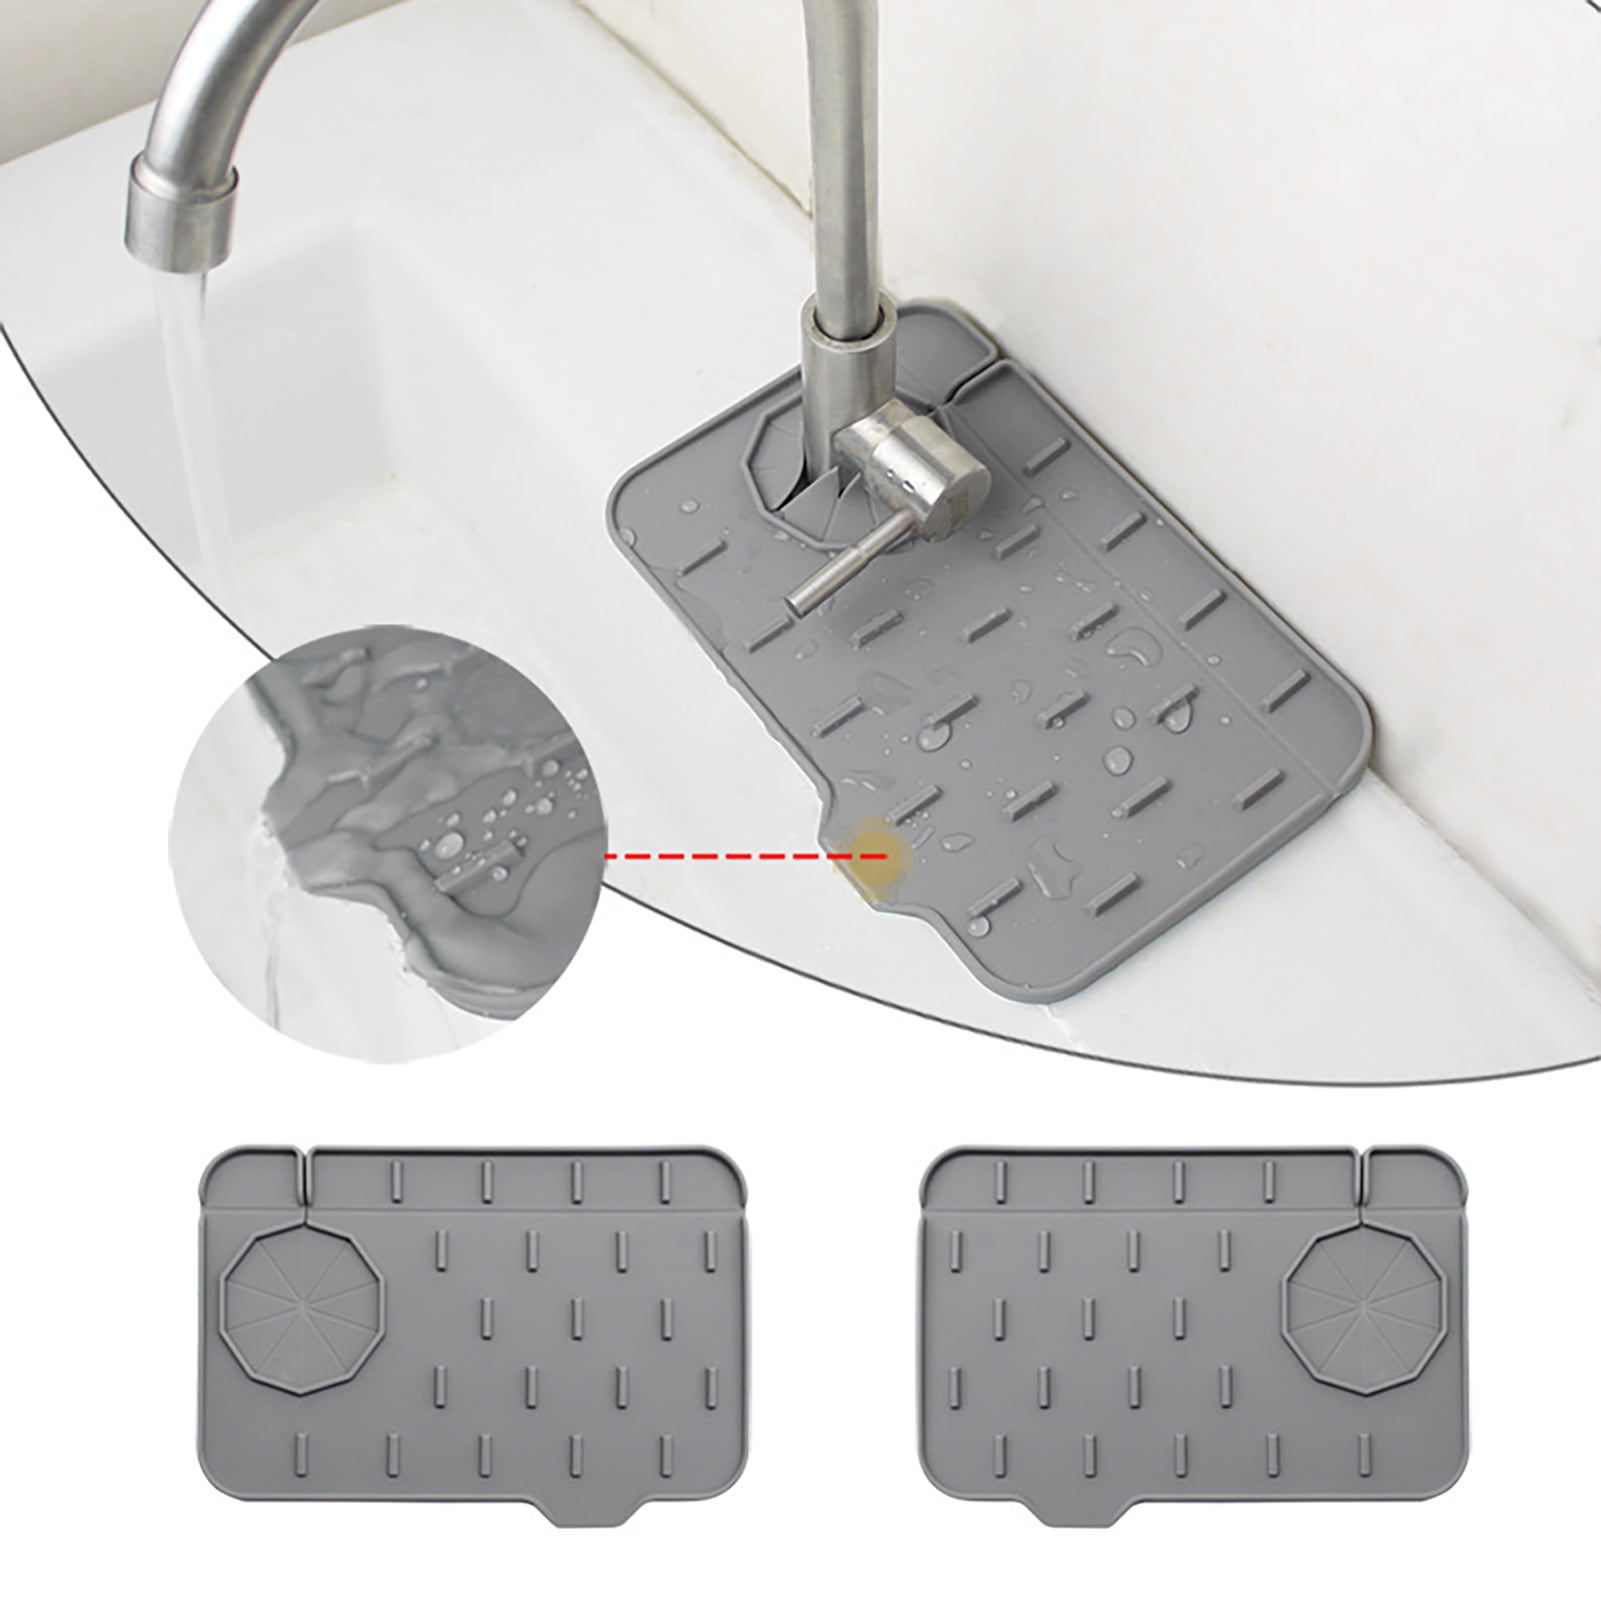 30x5.5 Inch Silicone Sink Faucet Mat for Kitchen Bathroom, 76cm Kitchen  Sink Splash Guard, Bathroom Faucet Drain Mat Handle Drip Catcher Tray, Countertop  Protector Absorbent Drying Pad Black 